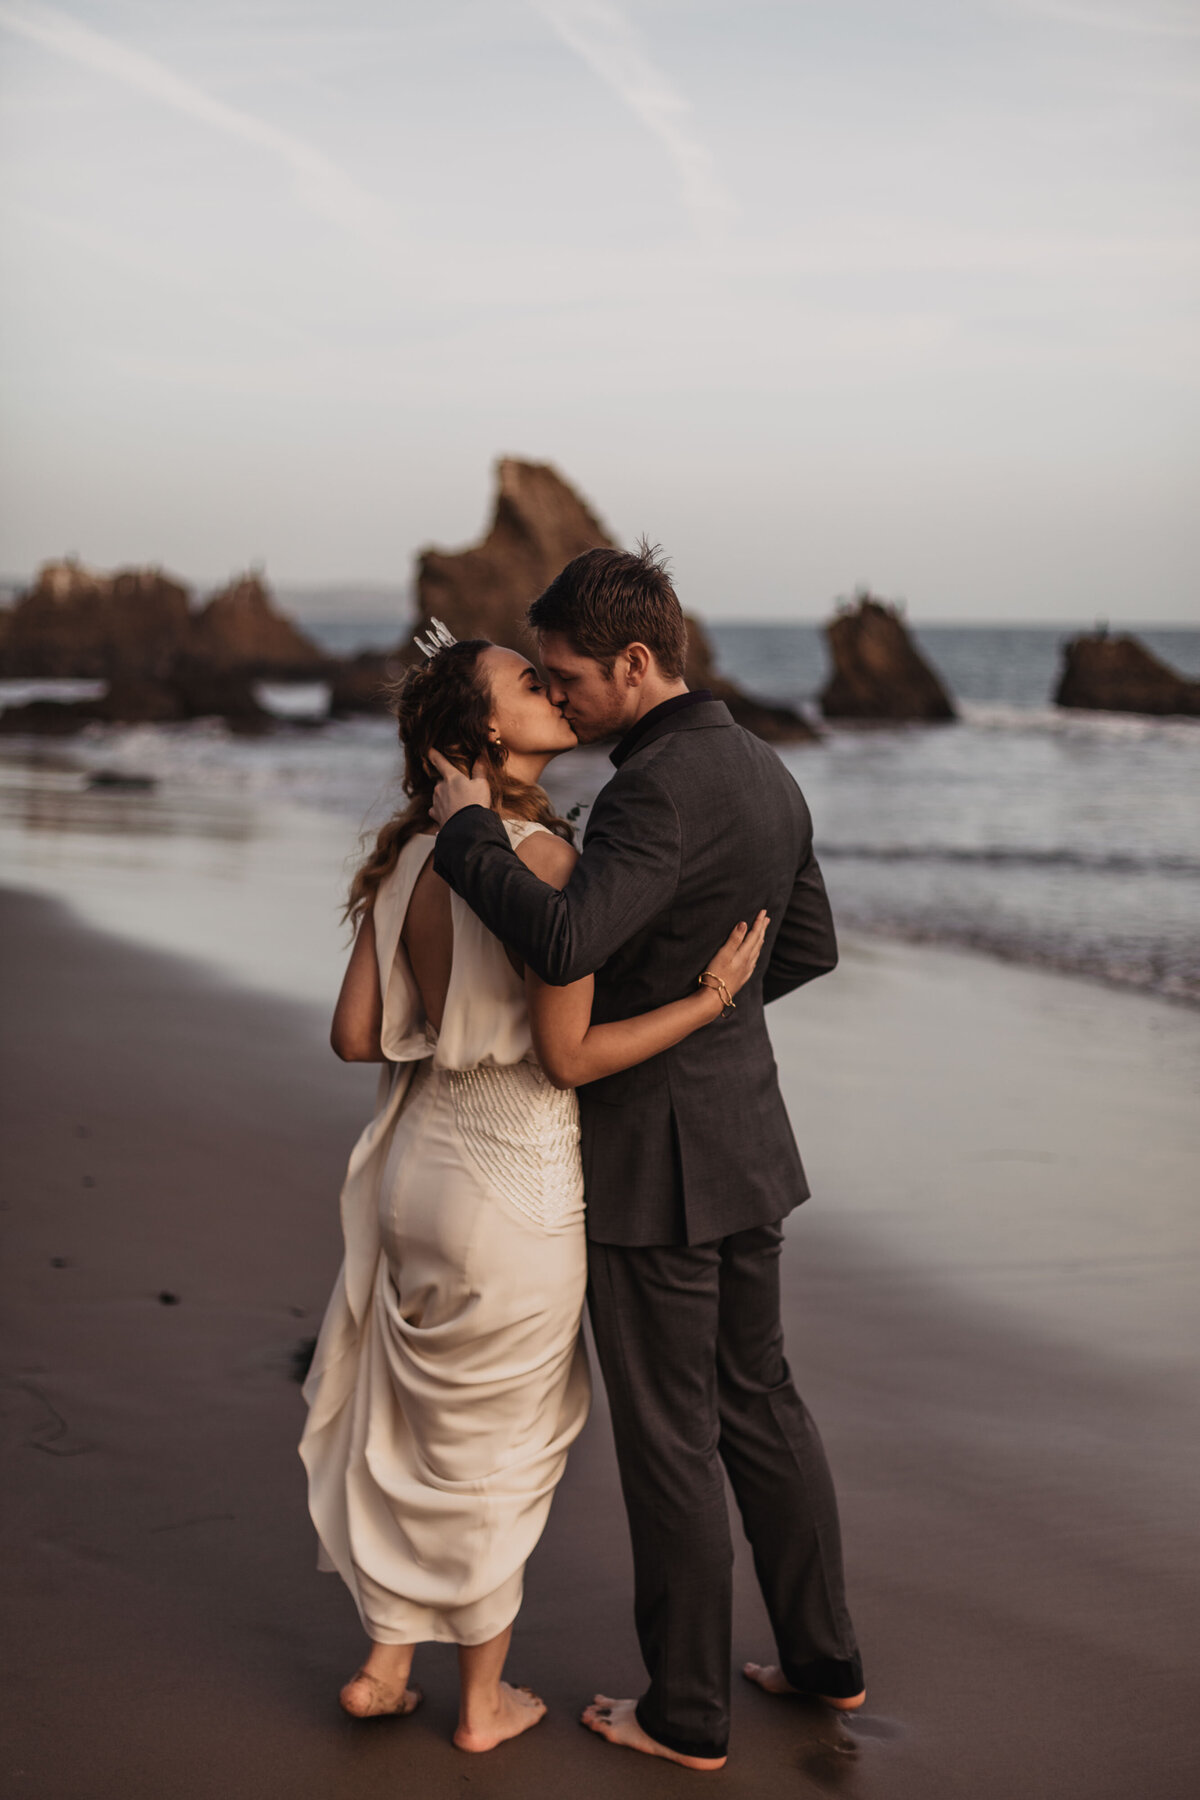 Adventure elopement at El Matador State Beach in Malibu, California photographed by Magnolia and Ember.